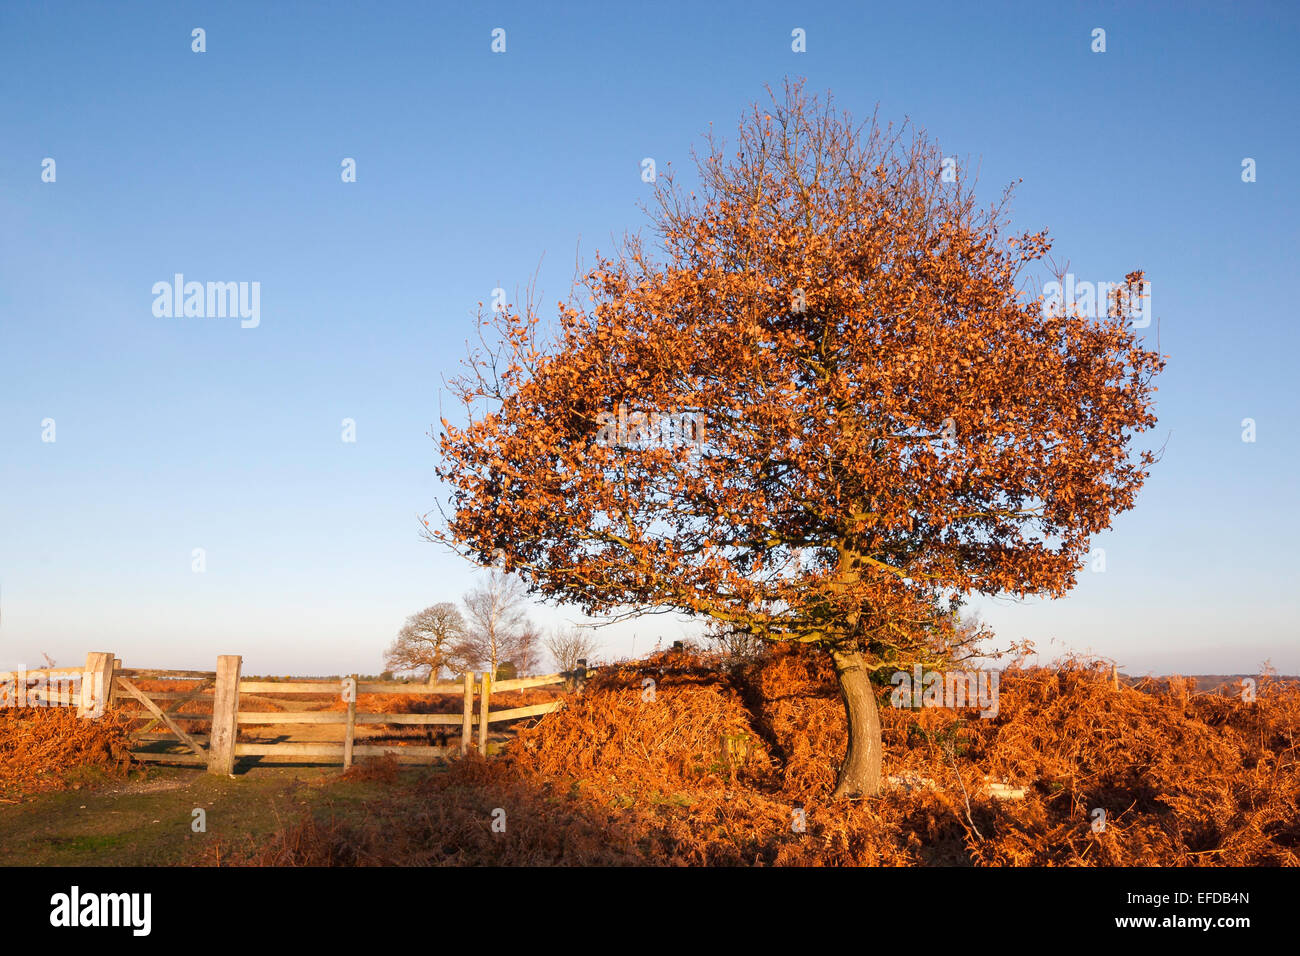 It's Autumn in the New Forest, National Park. An oak tree stands amongst bracken to the right of wooden fence and gate. Stock Photo